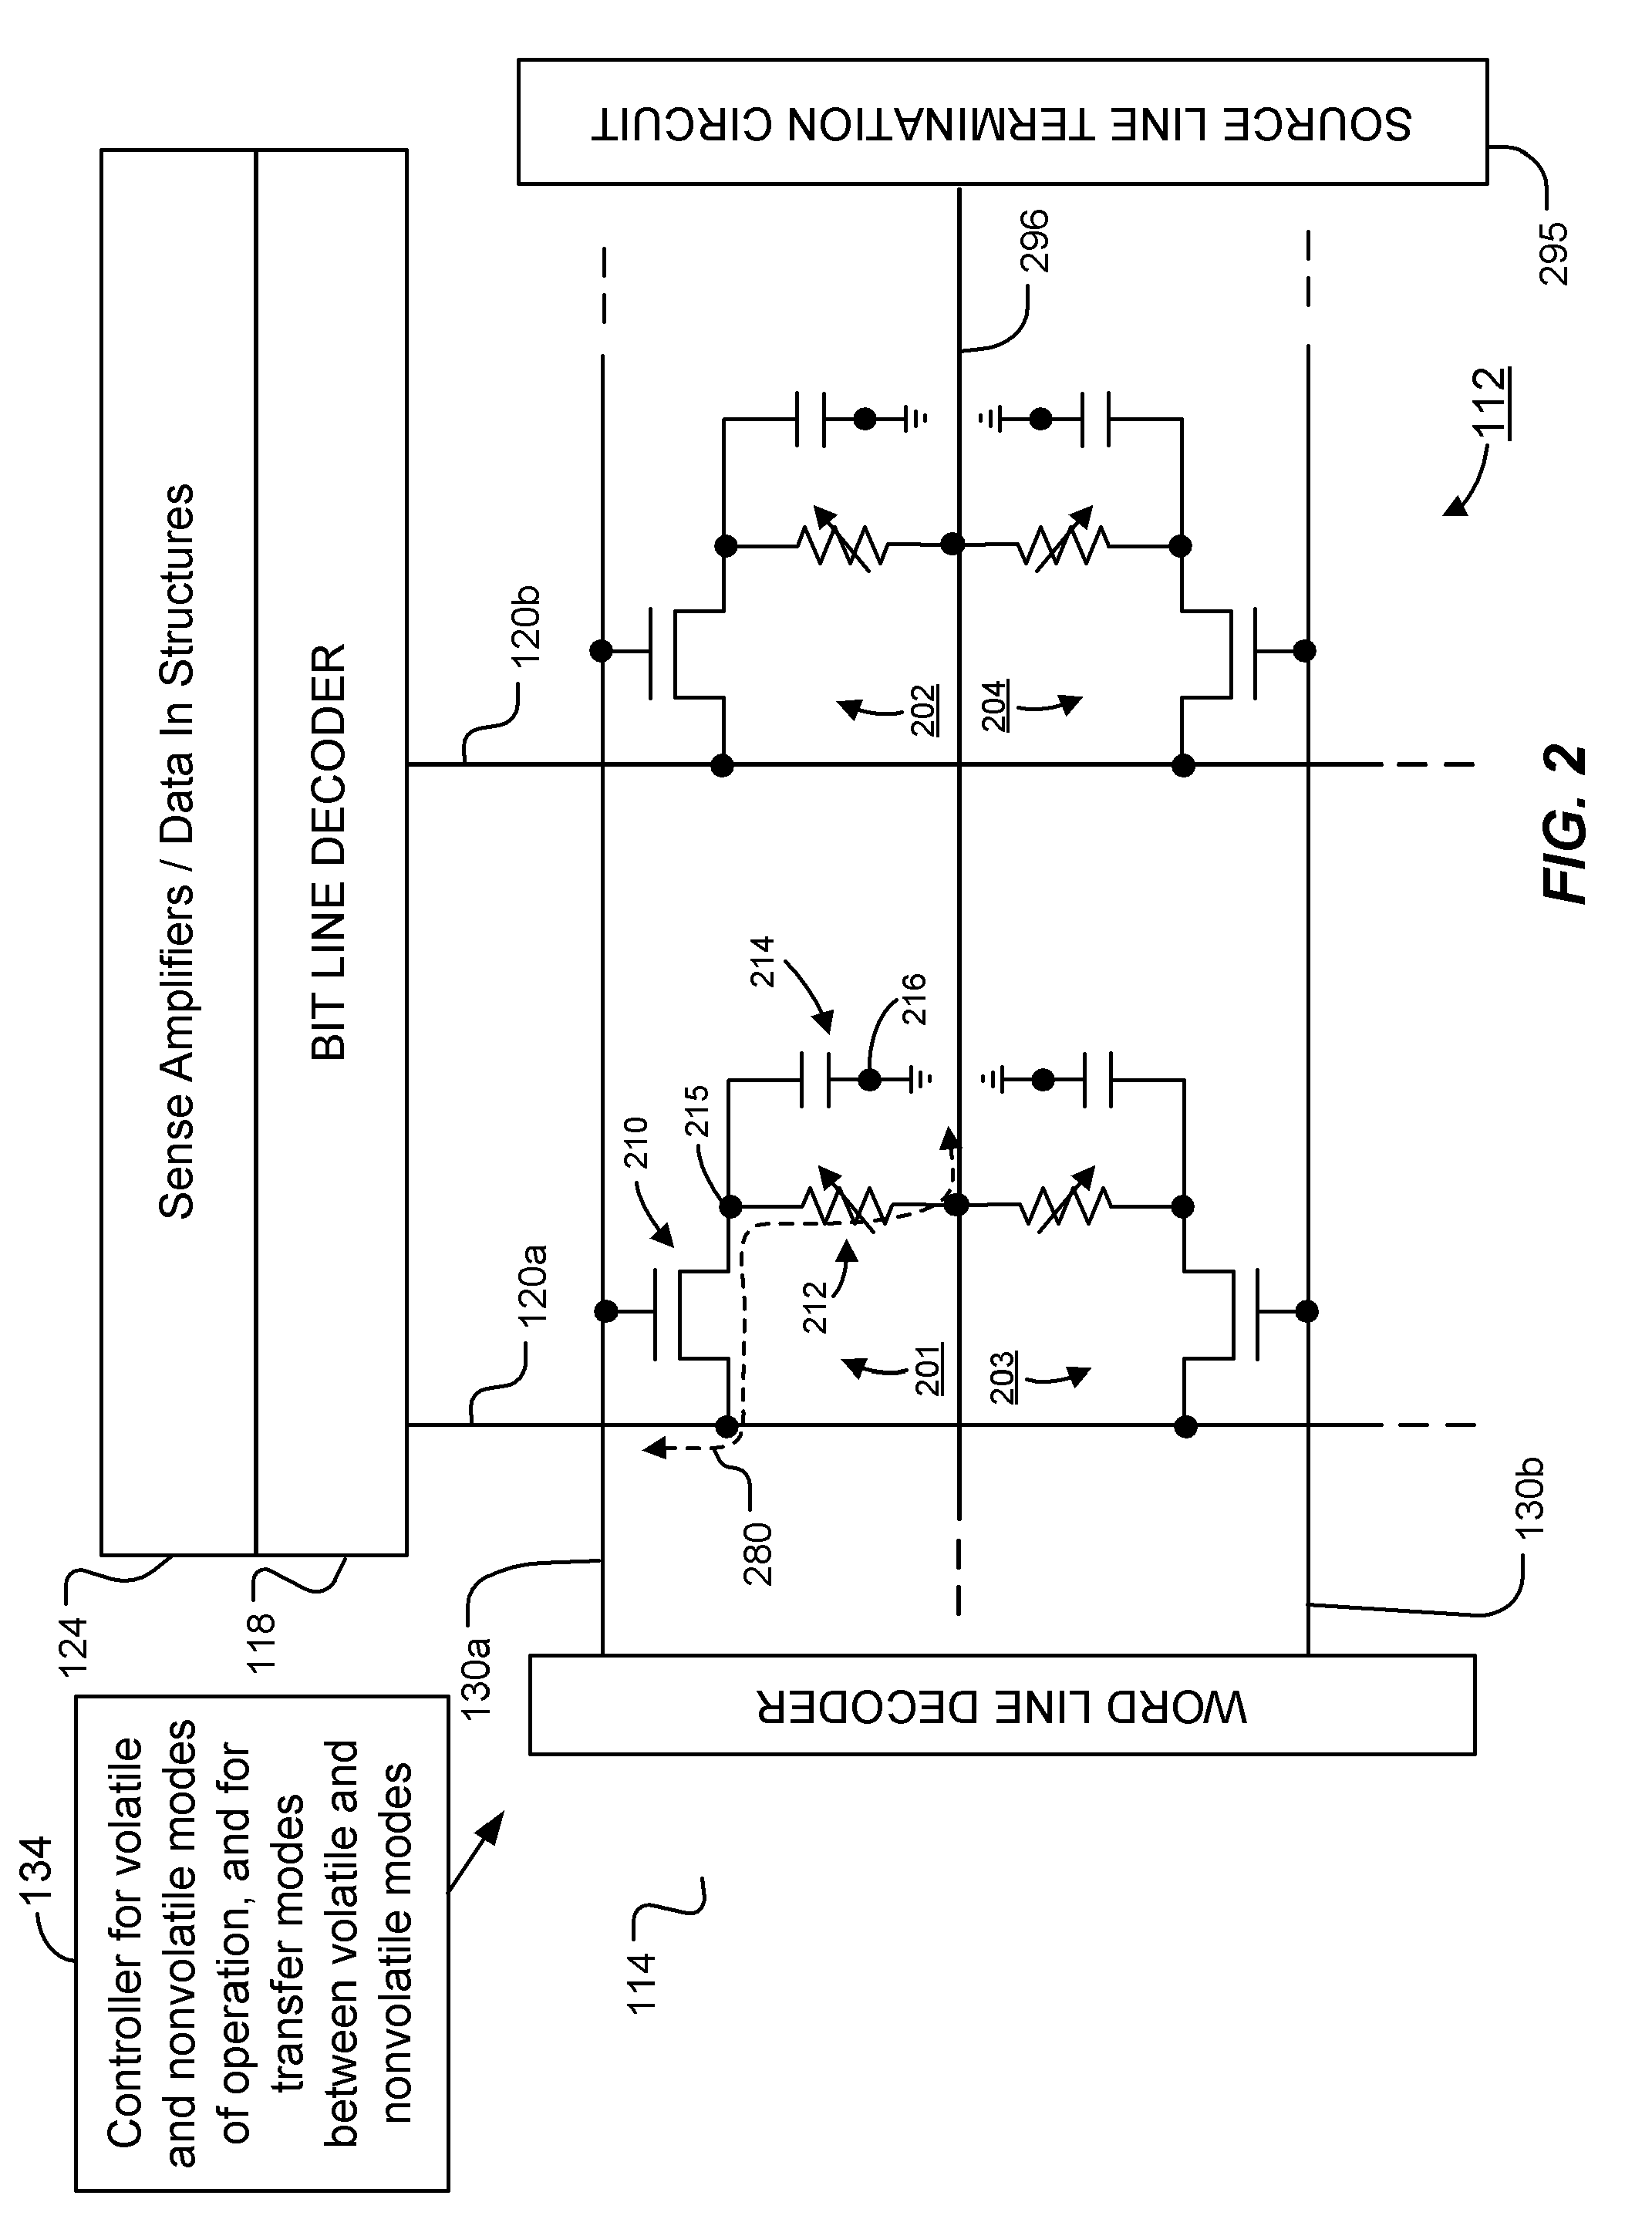 One-transistor, one-resistor, one-capacitor phase change memory